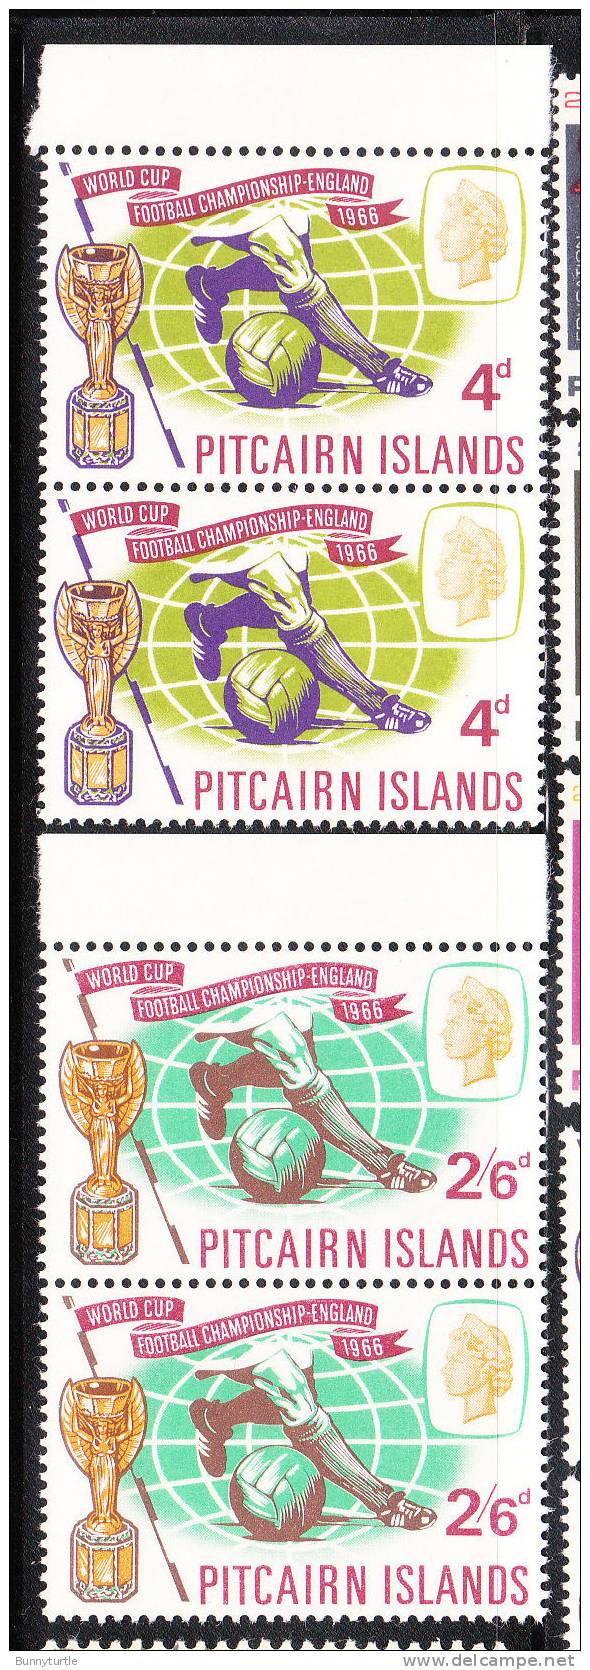 Pitcairn Islands 1966 World Cup Soccer Issue Omnibus Blk Of 2 MNH - Pitcairninsel